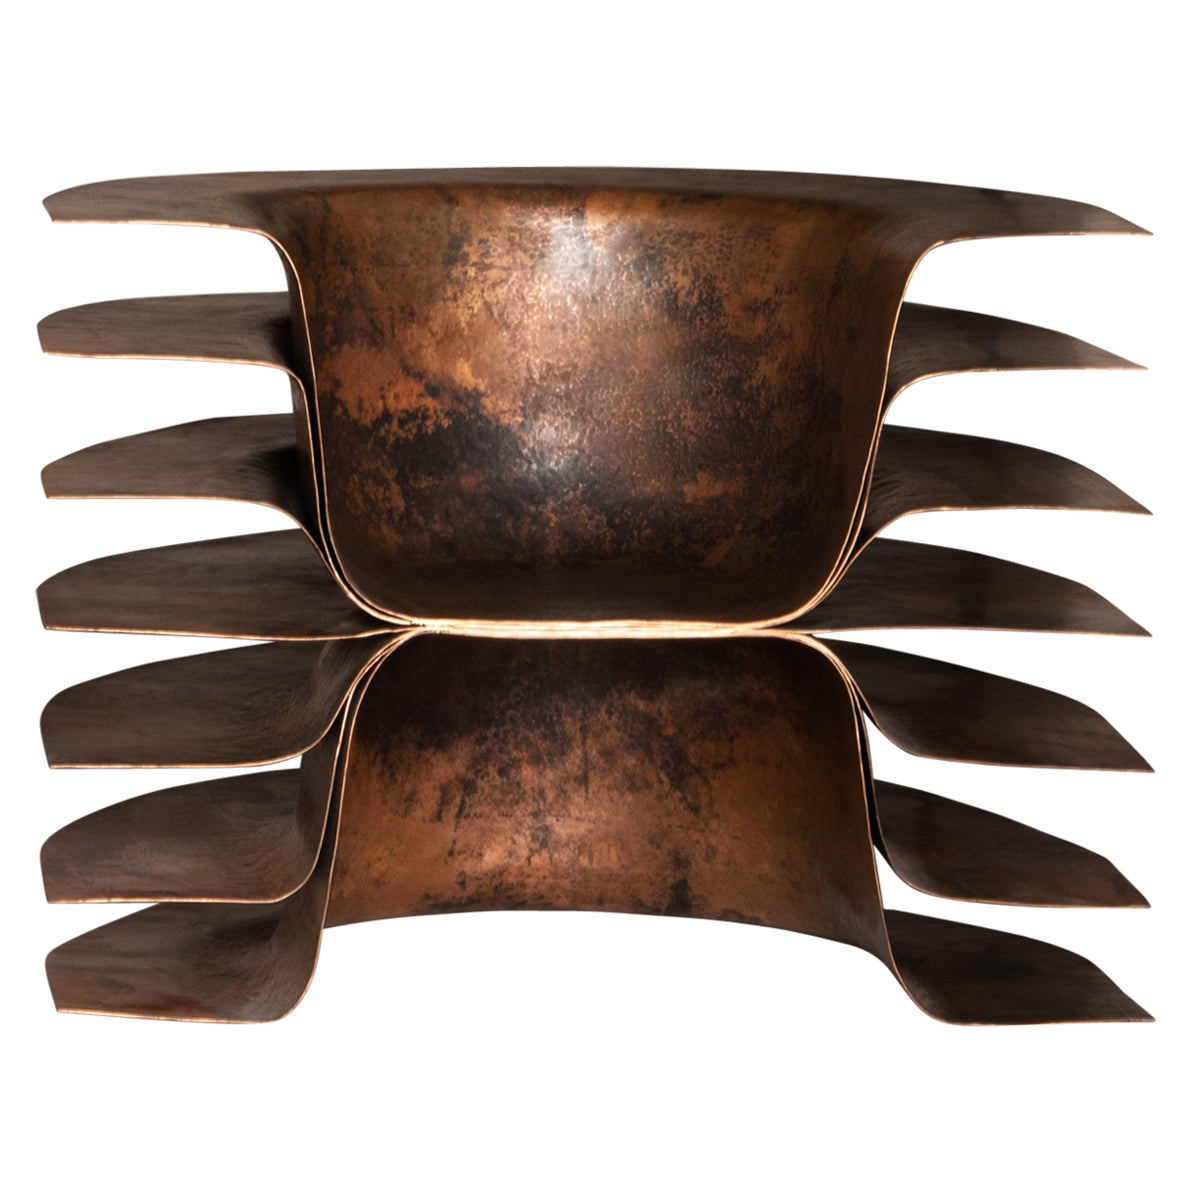 Obj-05 Copper Lounge Chair by Manu Bano